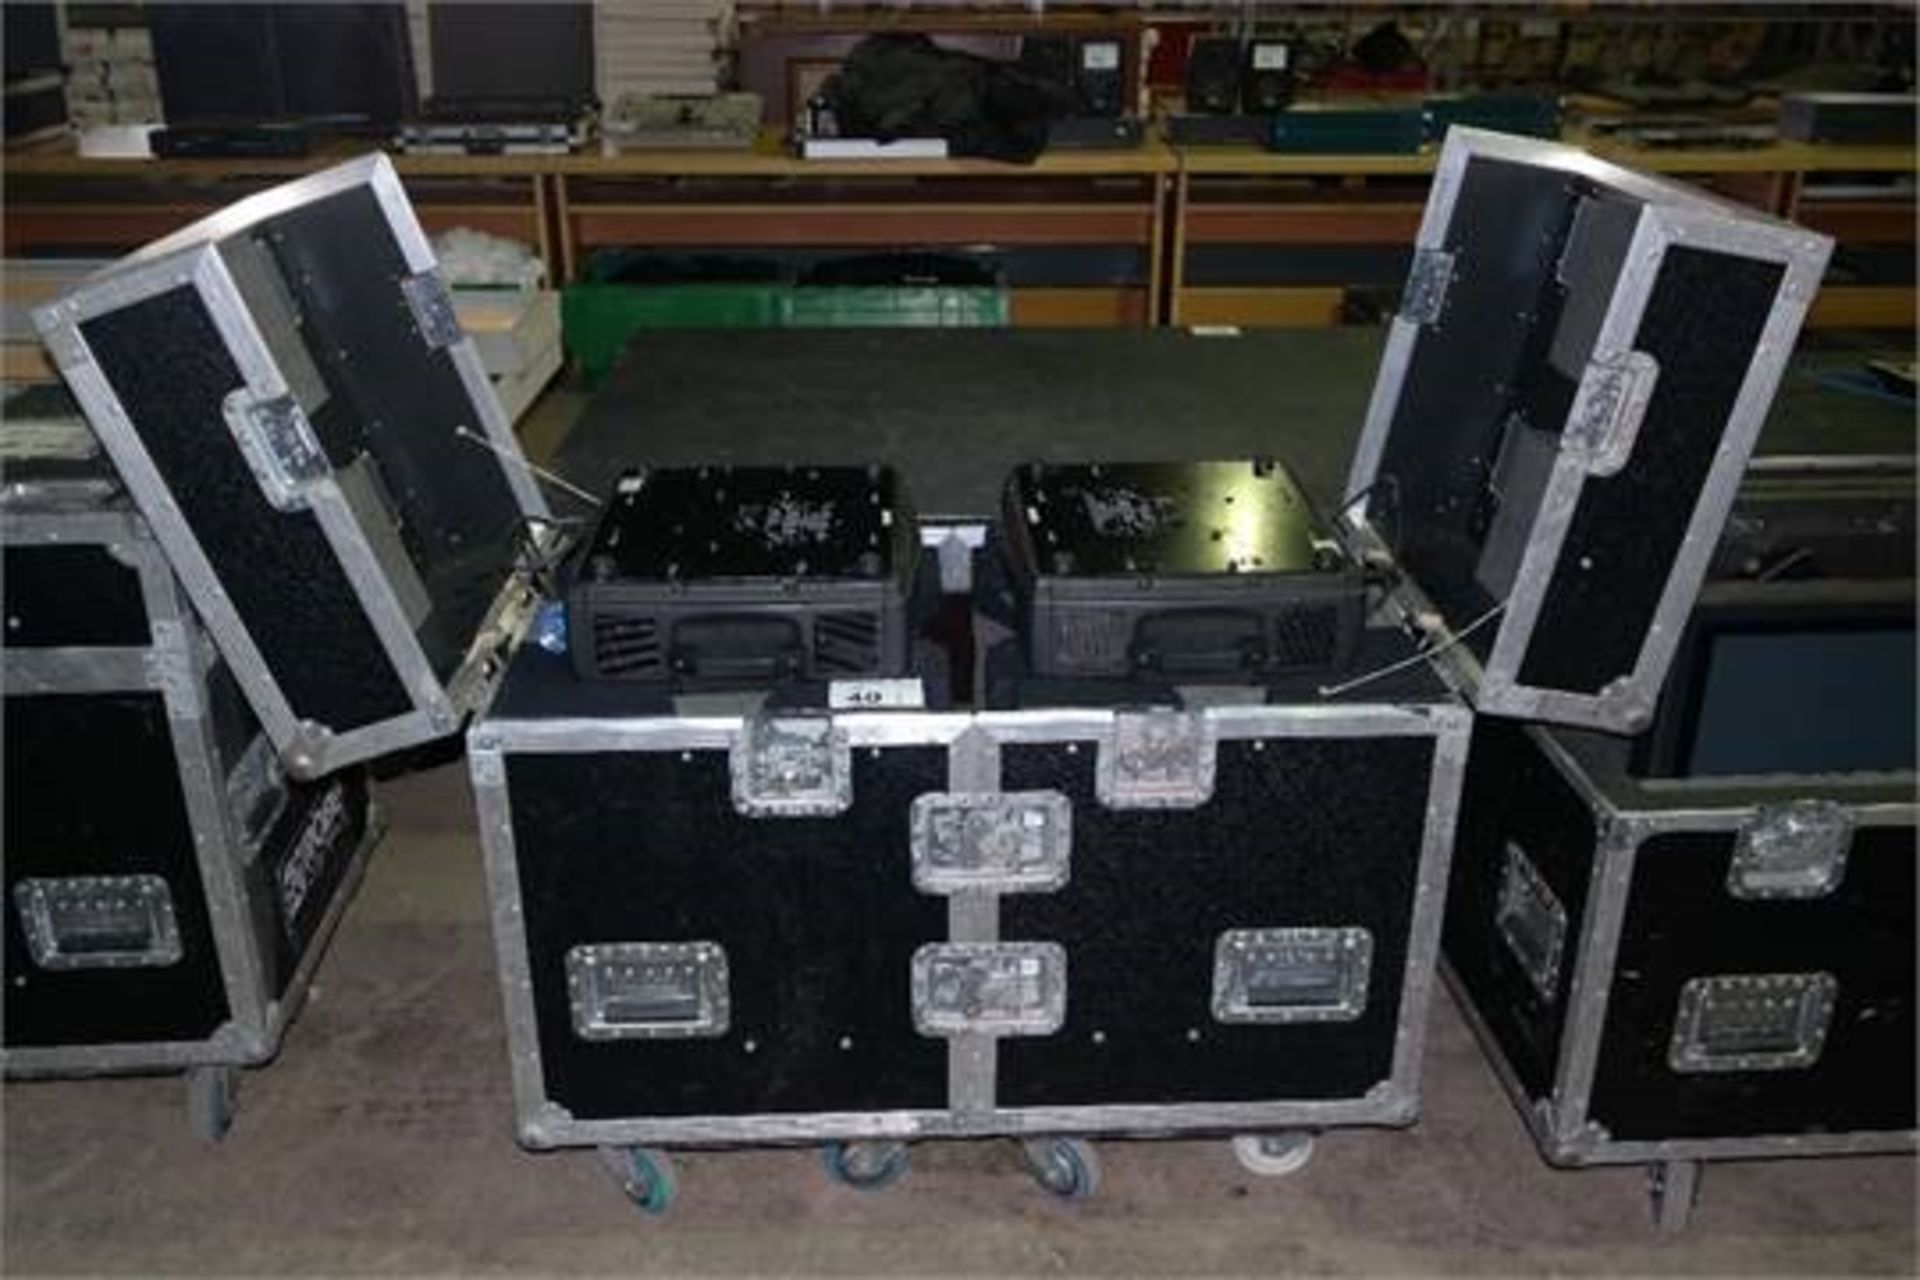 2 x Robe 575 Moving Heads With Hook Clamps & Safety Chains In Dual Flight Case - Ref: 443 - - Image 2 of 2